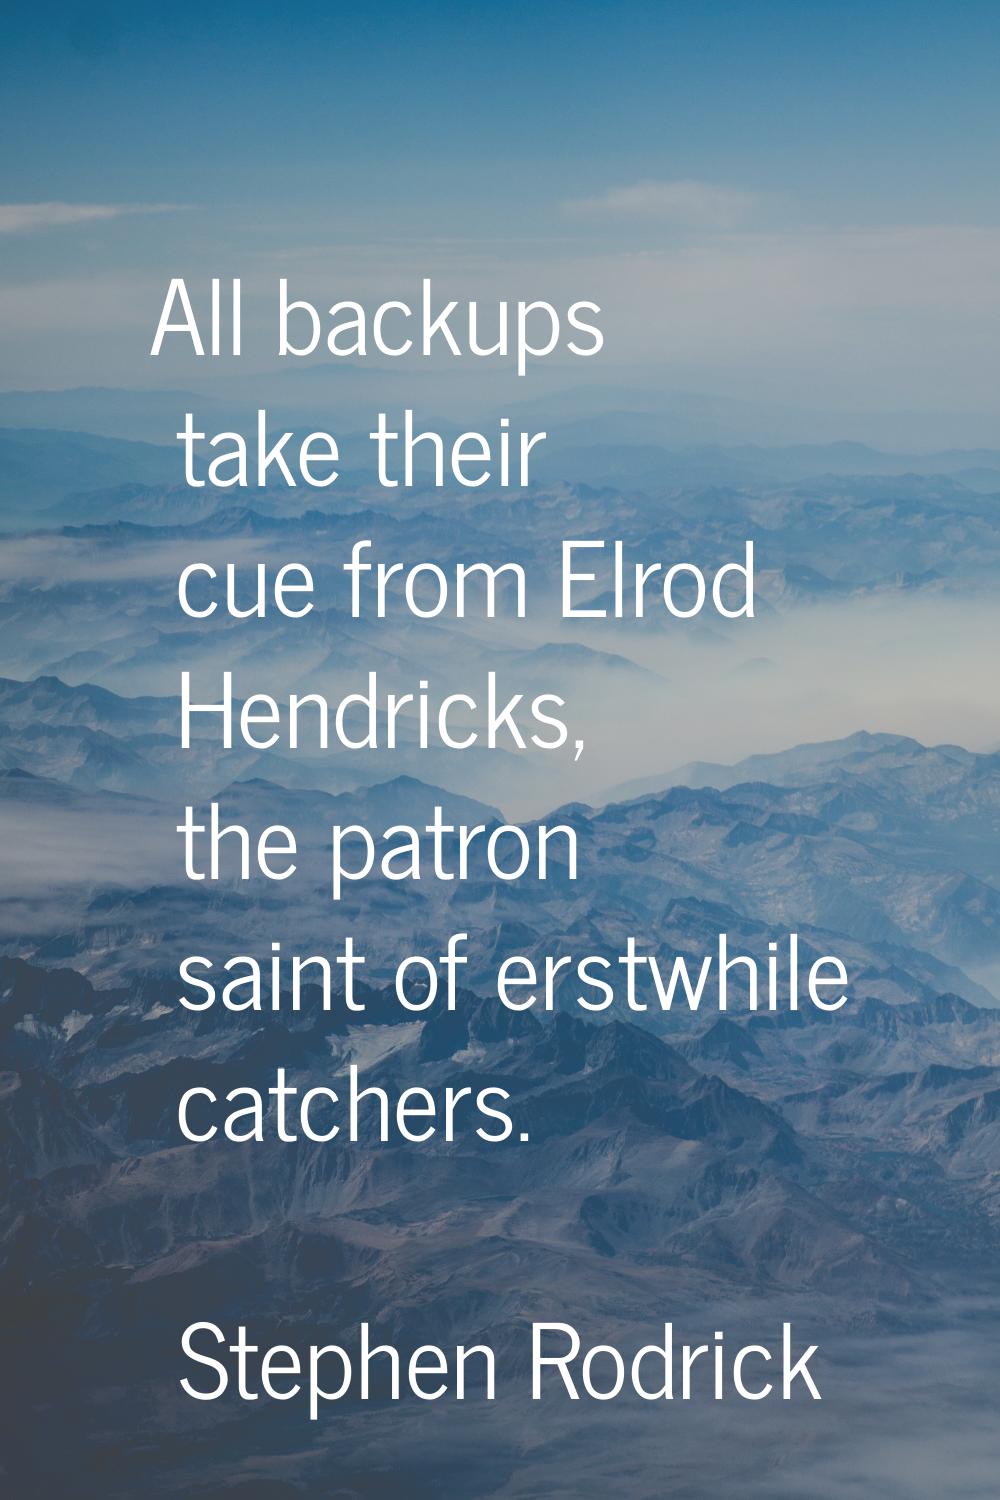 All backups take their cue from Elrod Hendricks, the patron saint of erstwhile catchers.